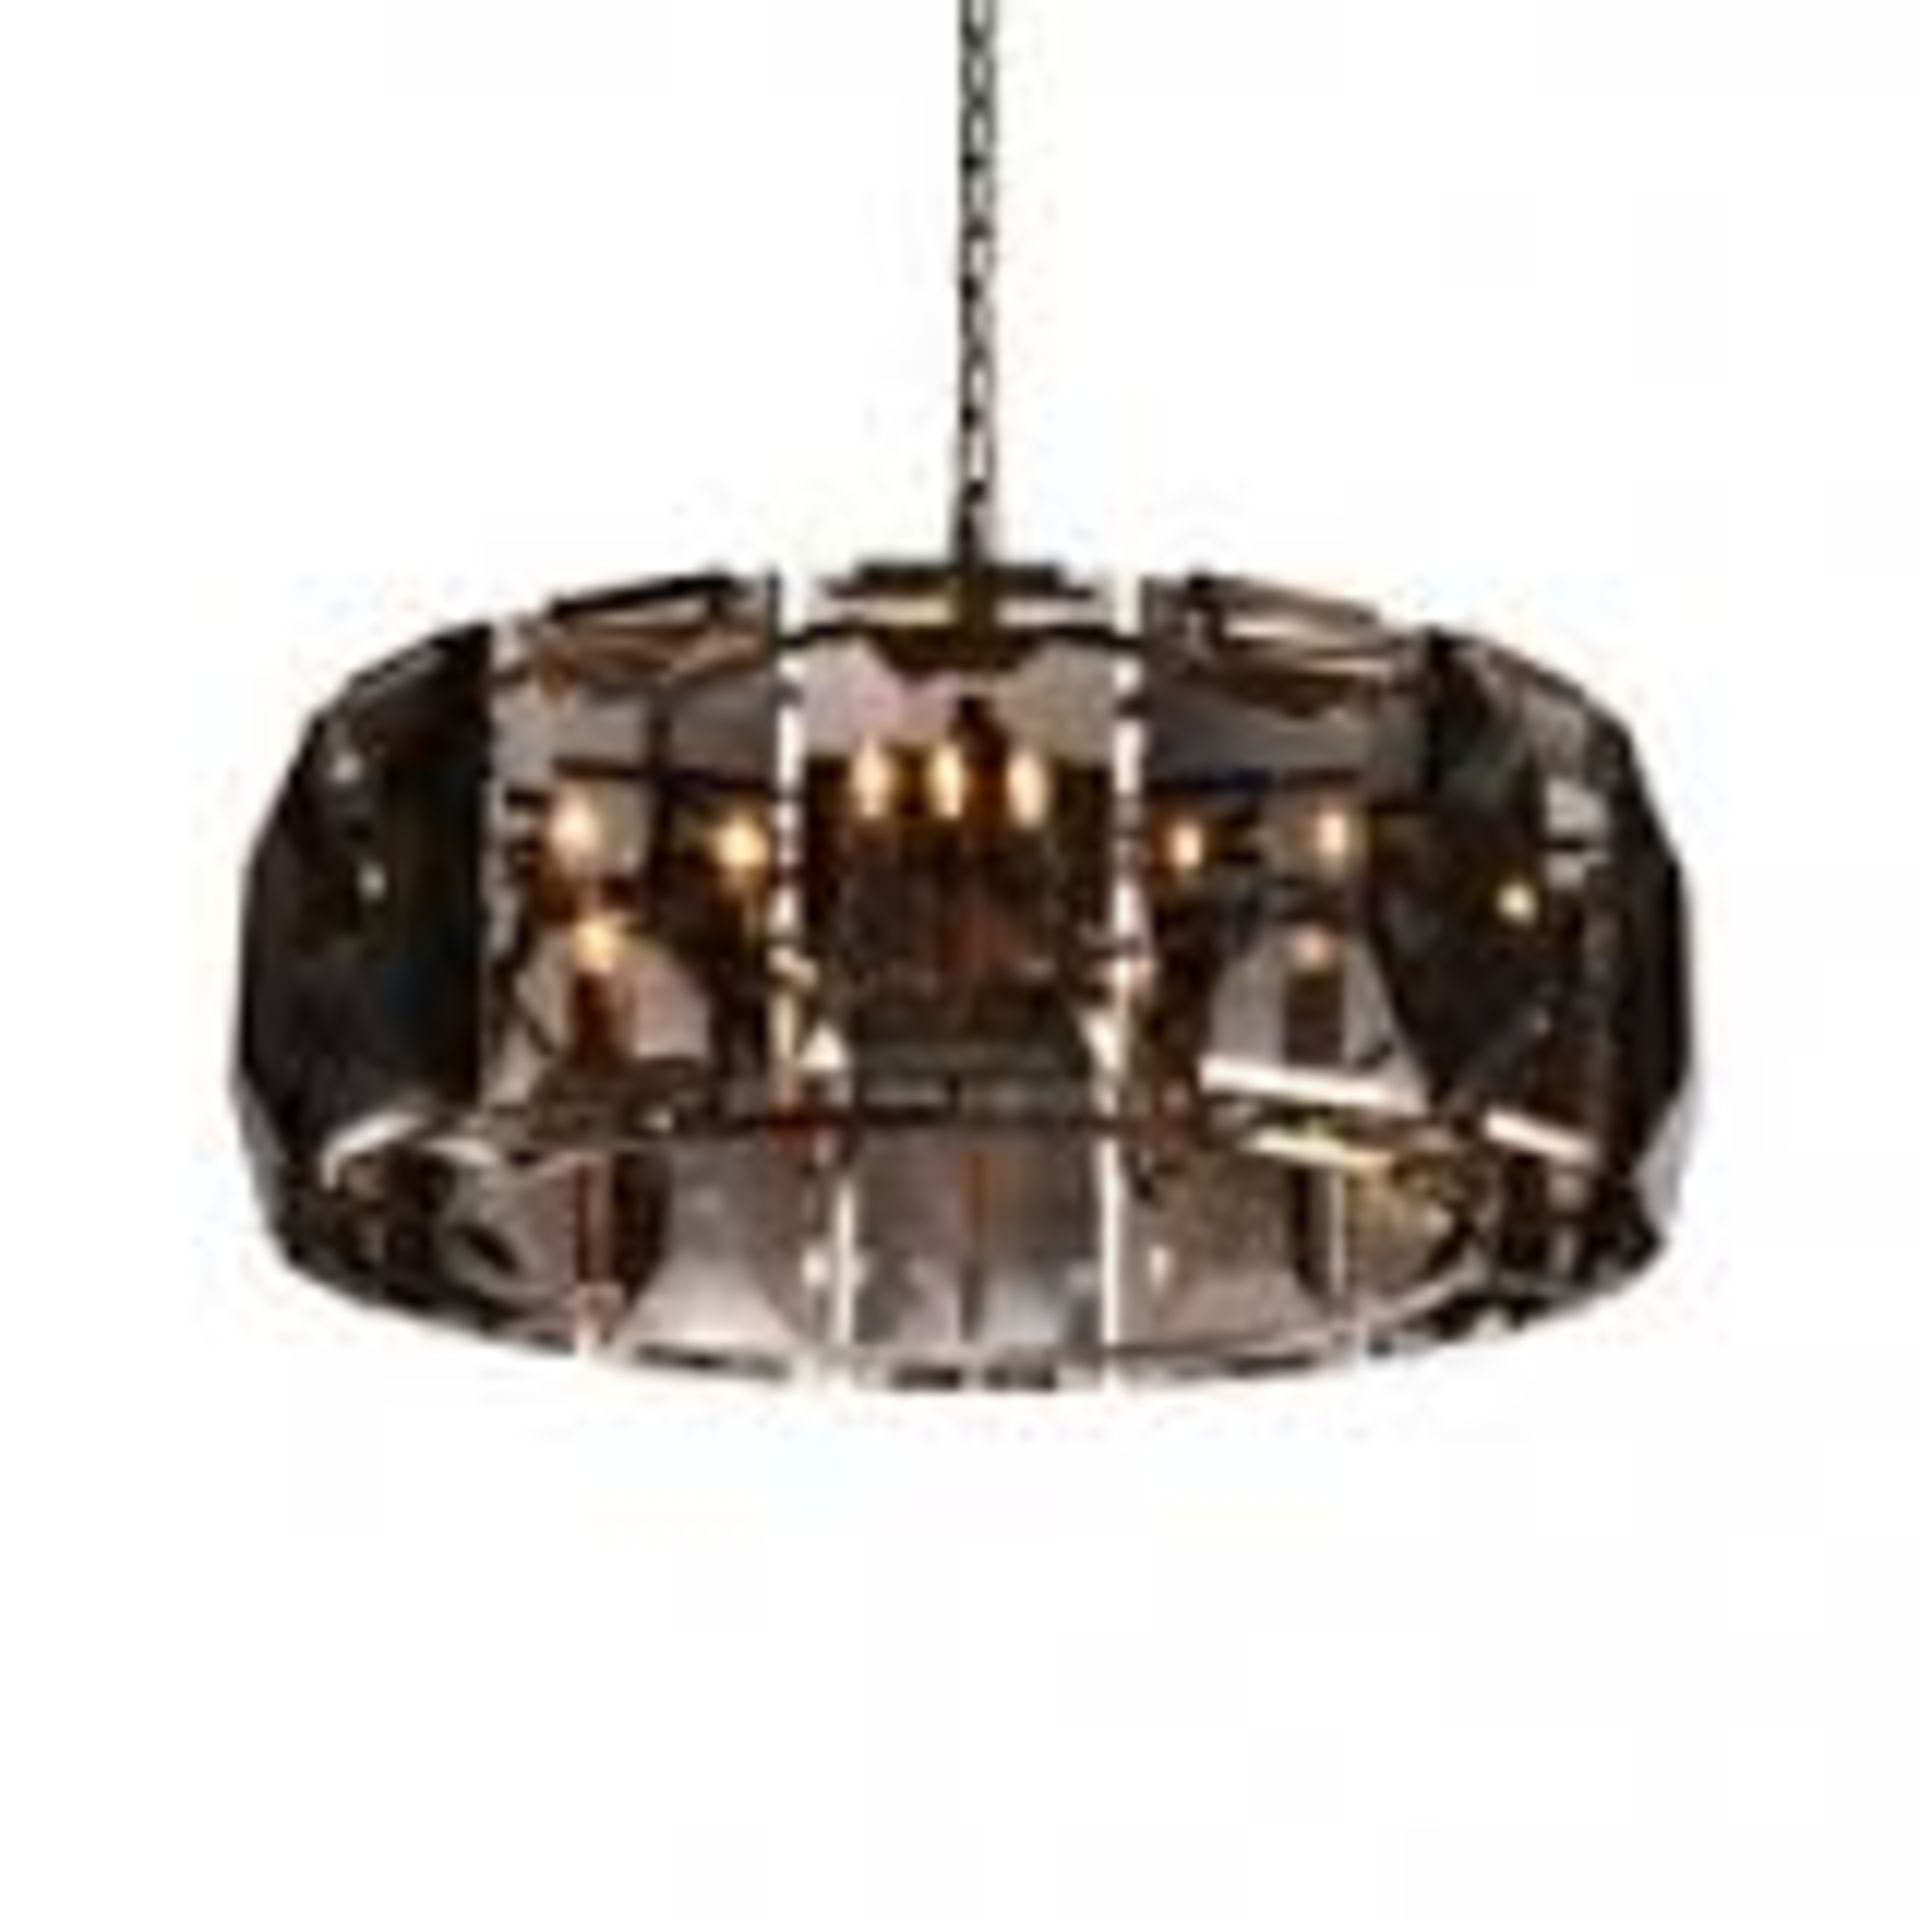 Facet Rectangular Pendant The Facet range has been inspired by 1970's bold retro design the - Image 2 of 2